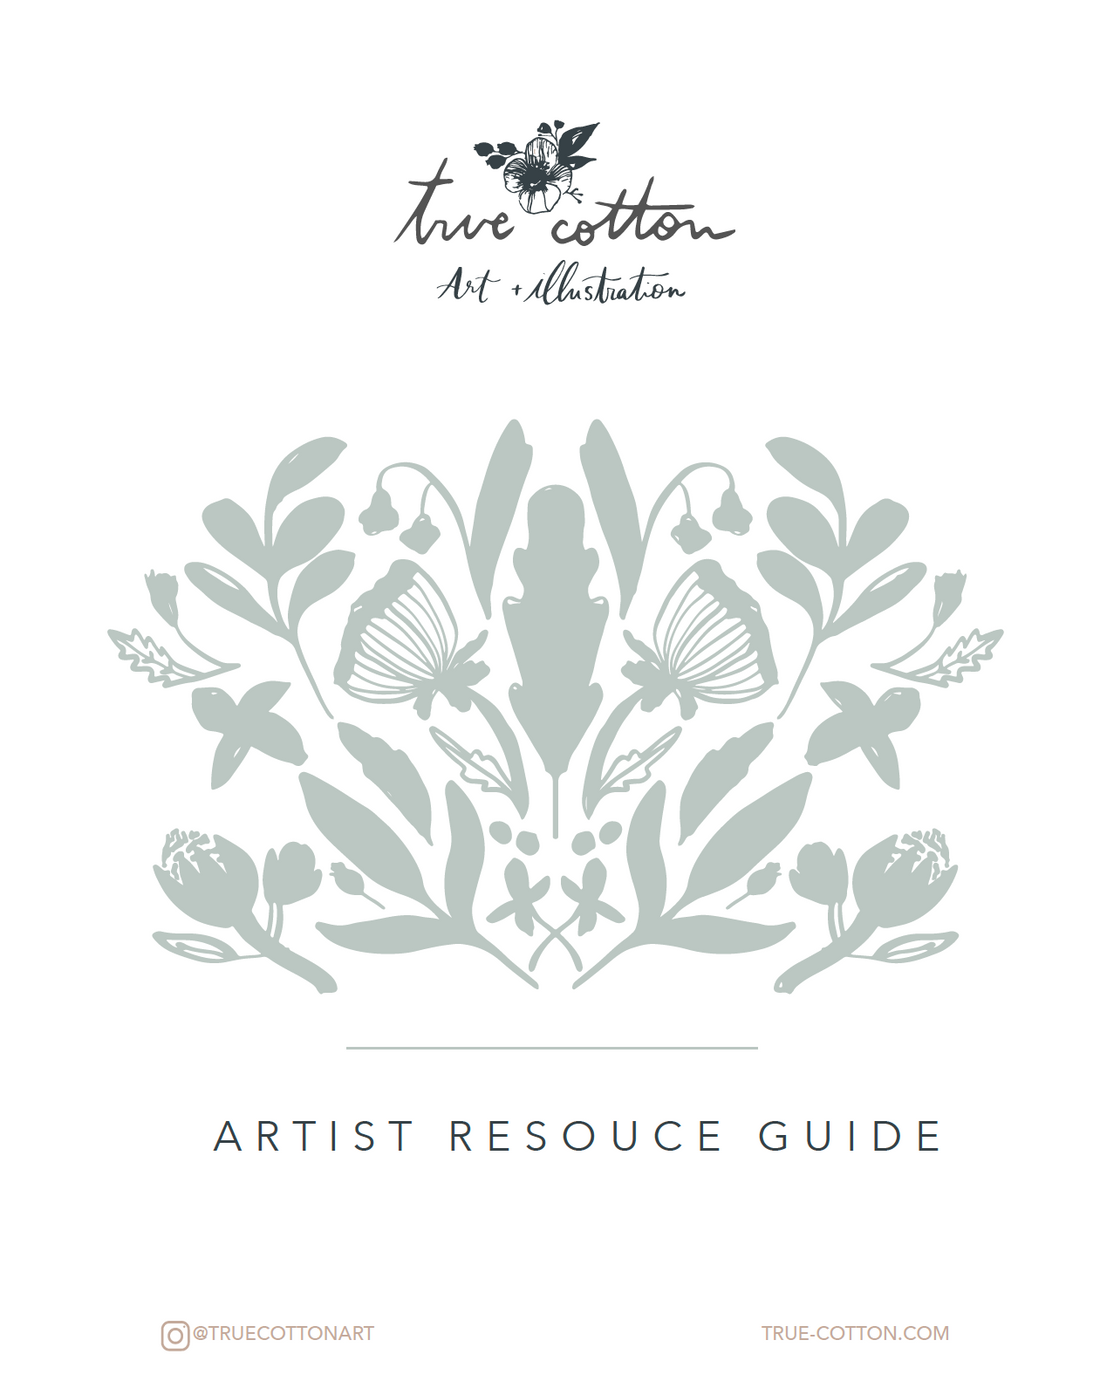 Artist Resource Guide —FREE!